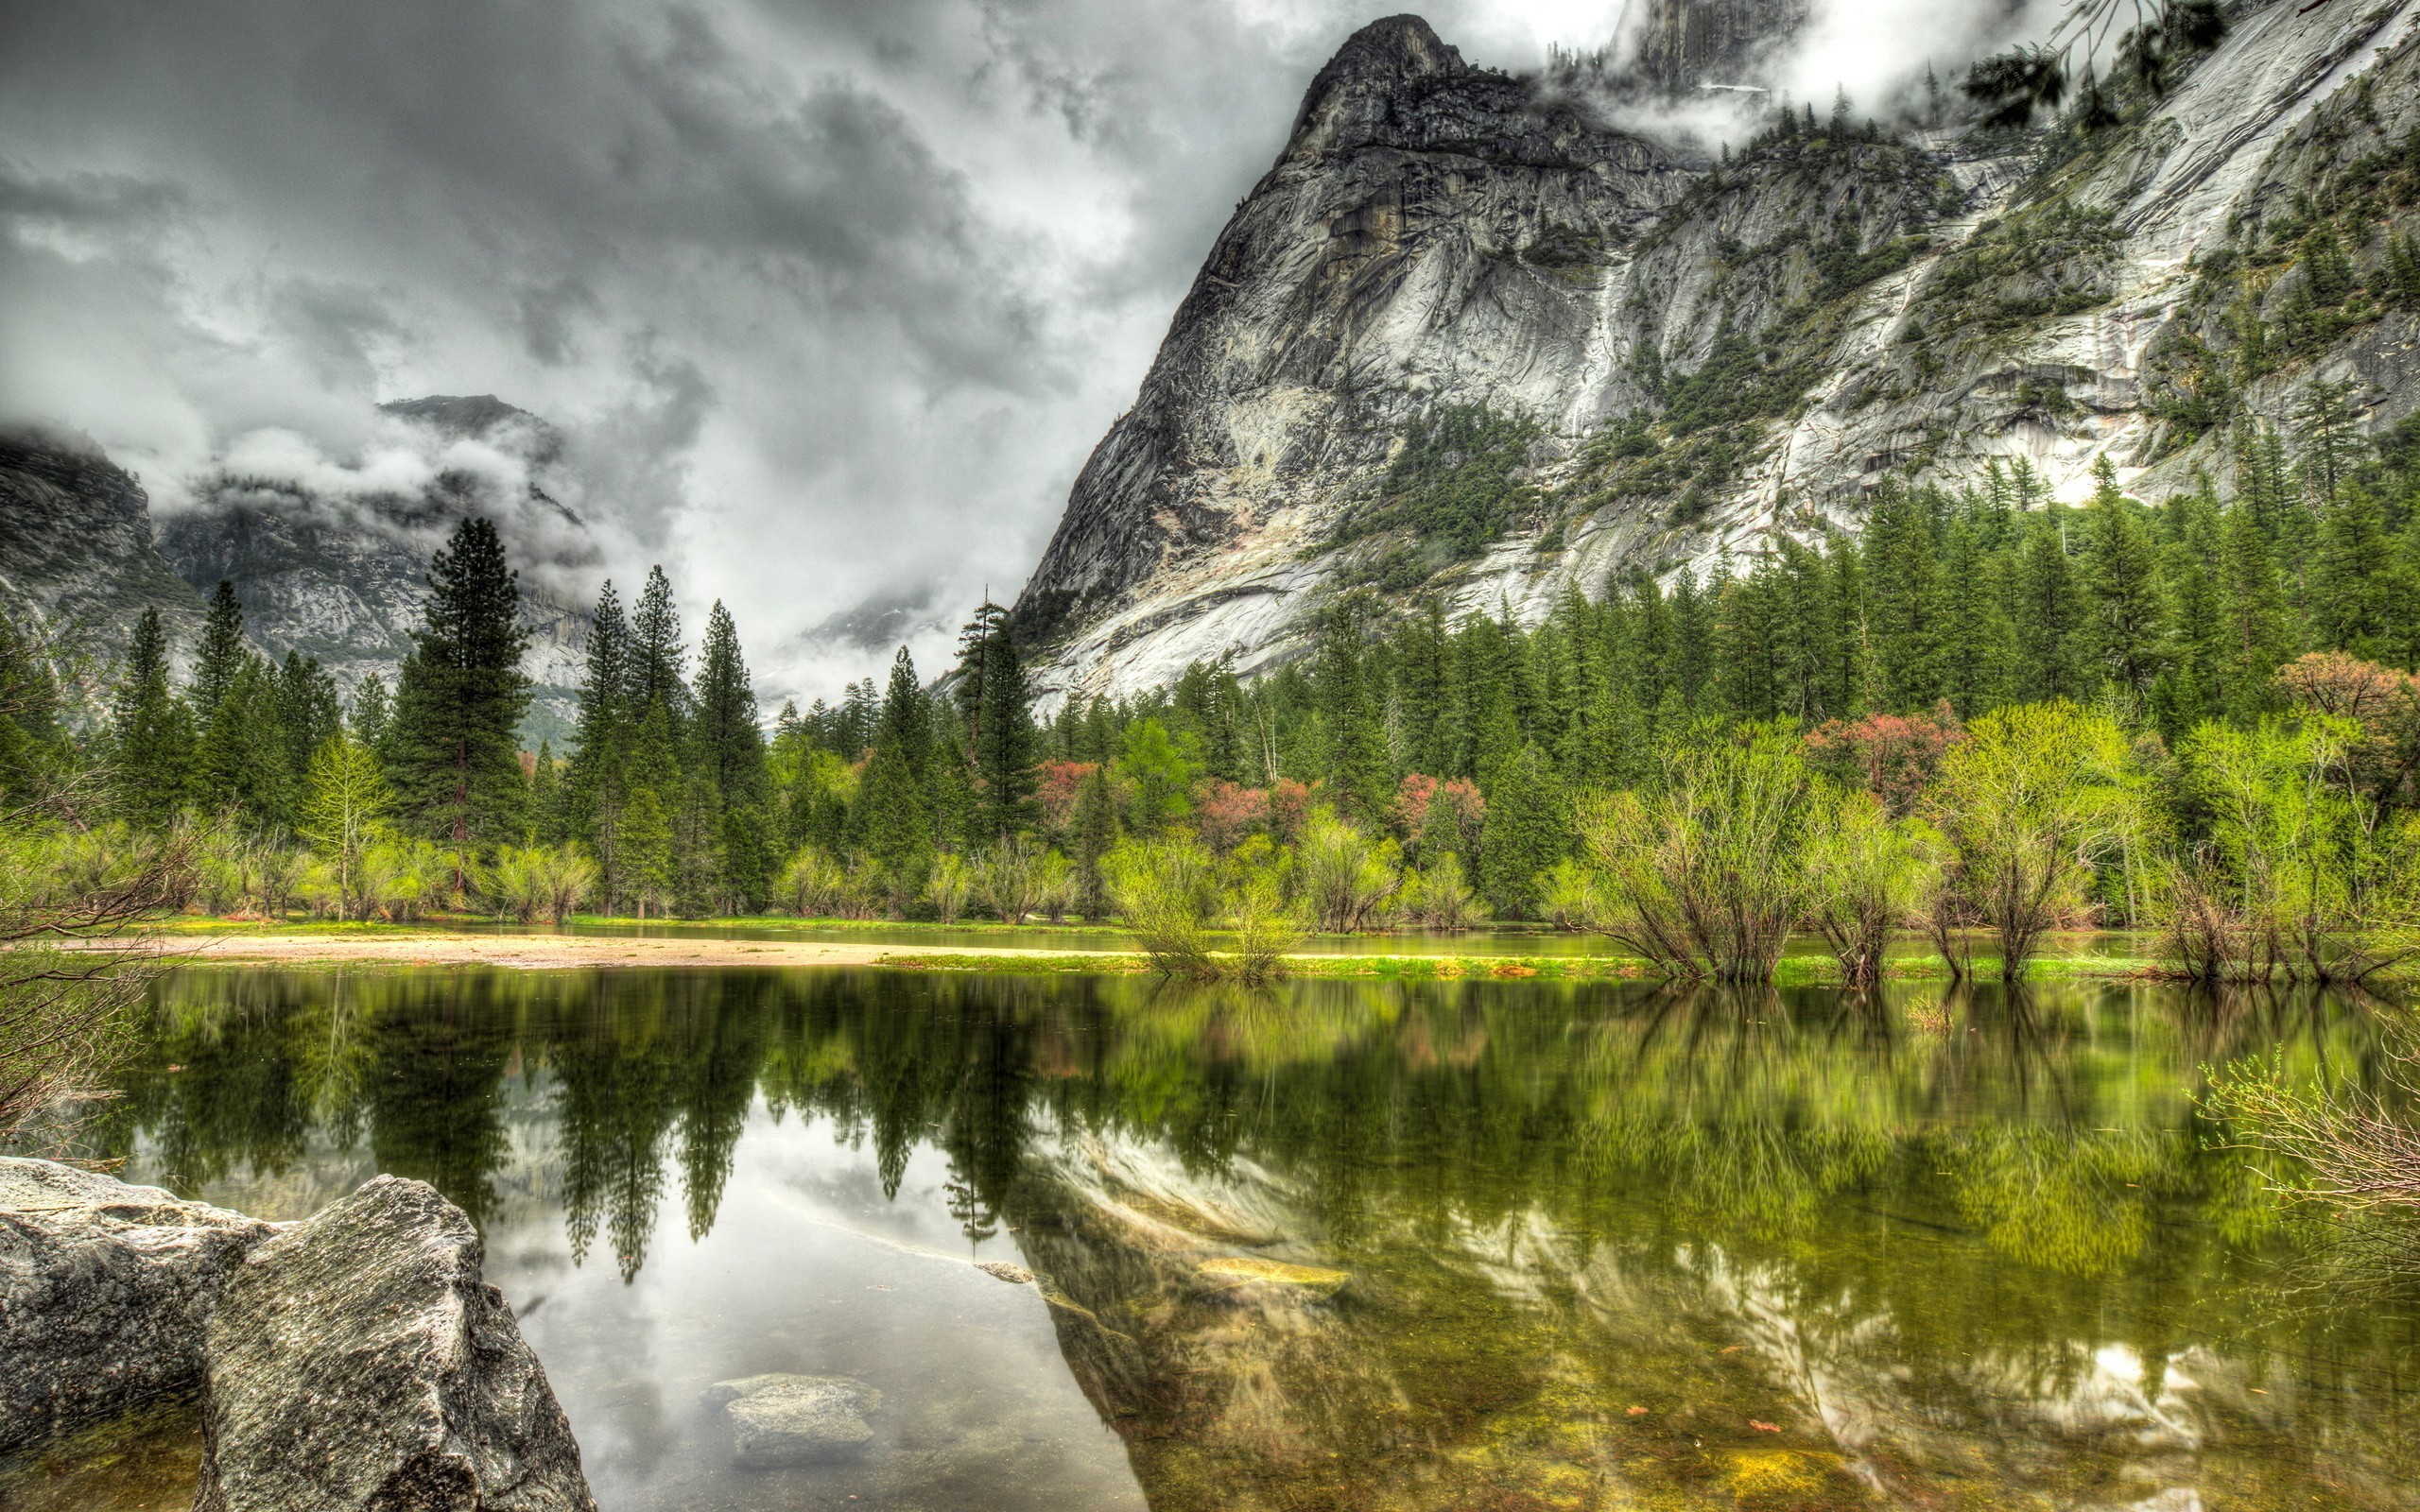 Nature HDR Landscape Lake Mountains Trees Clouds Stones Reflection Yosemite National Park Half Dome 2560x1600